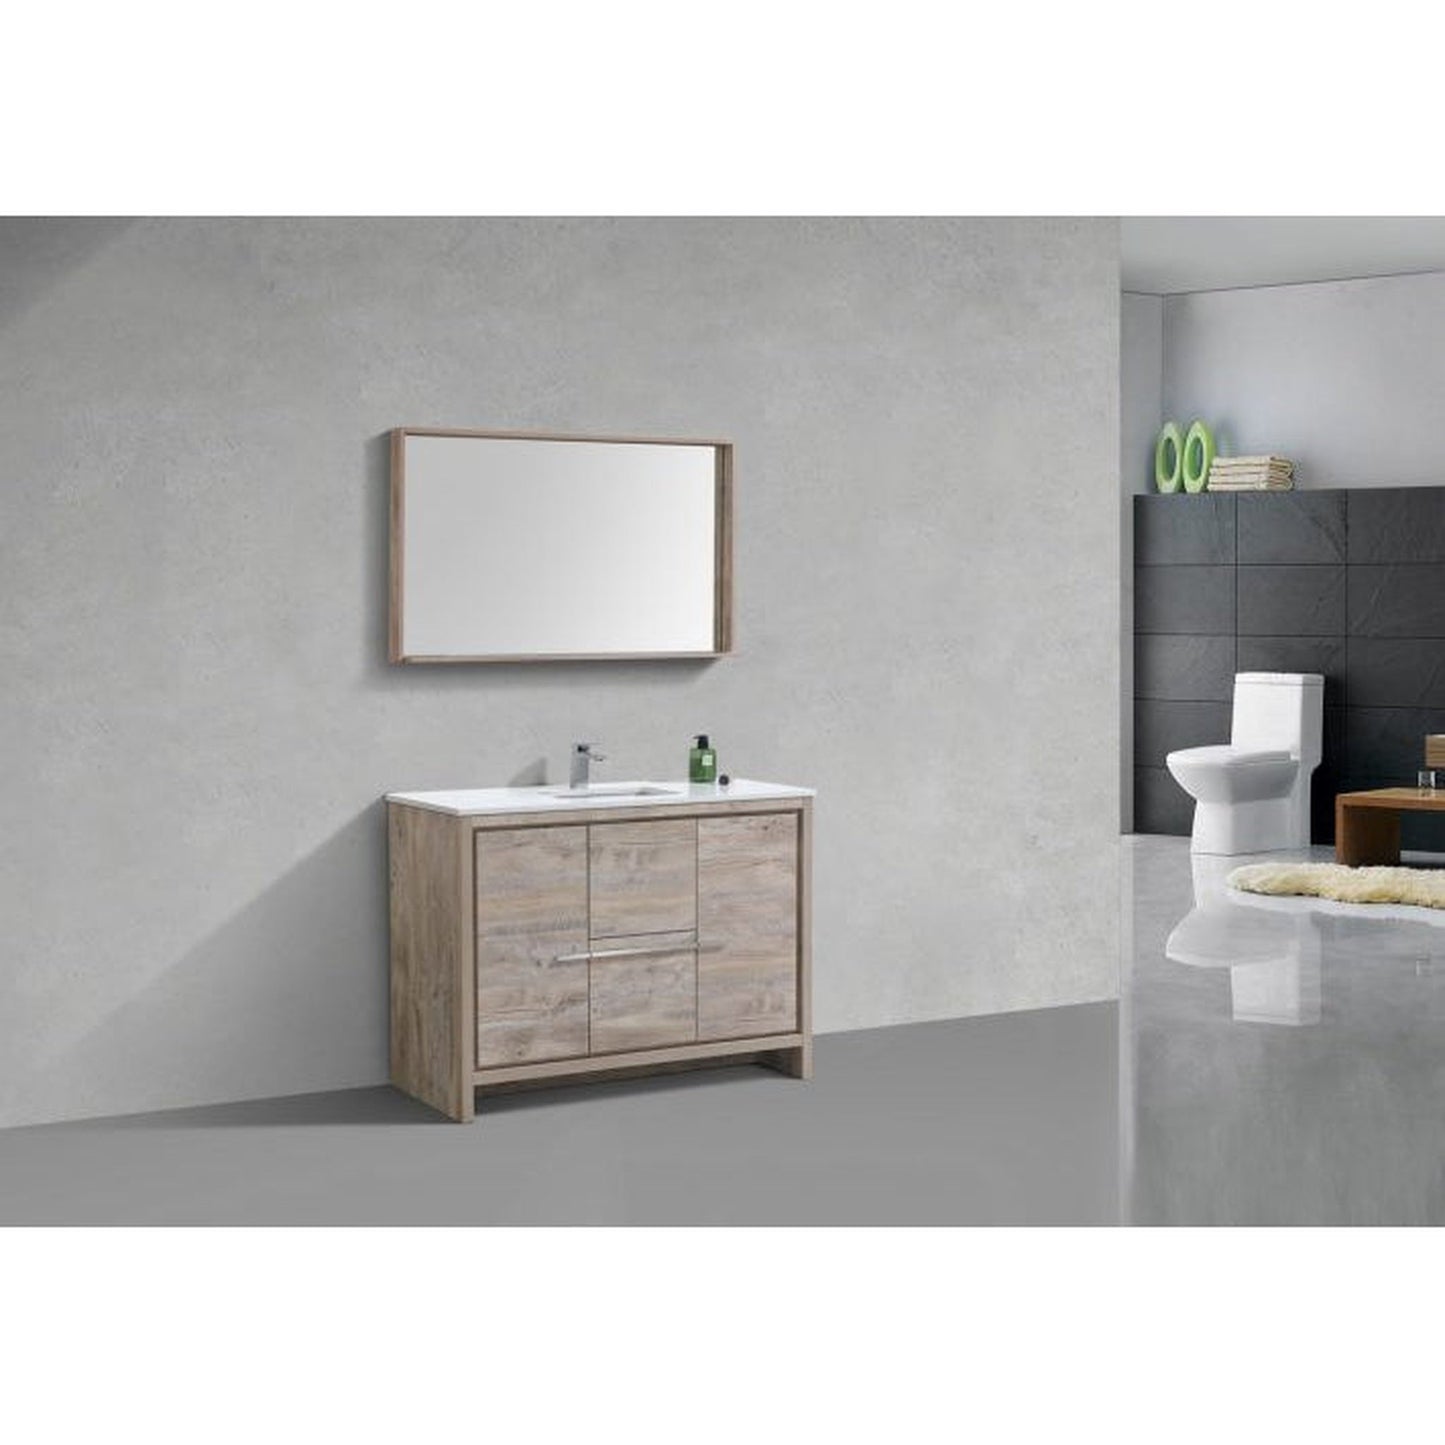 KubeBath Dolce 48" Nature Wood Freestanding Modern Bathroom Vanity With Quartz Vanity Top & Ceramic Sink With Overflow and 48" Wood Framed Mirror With Shelf